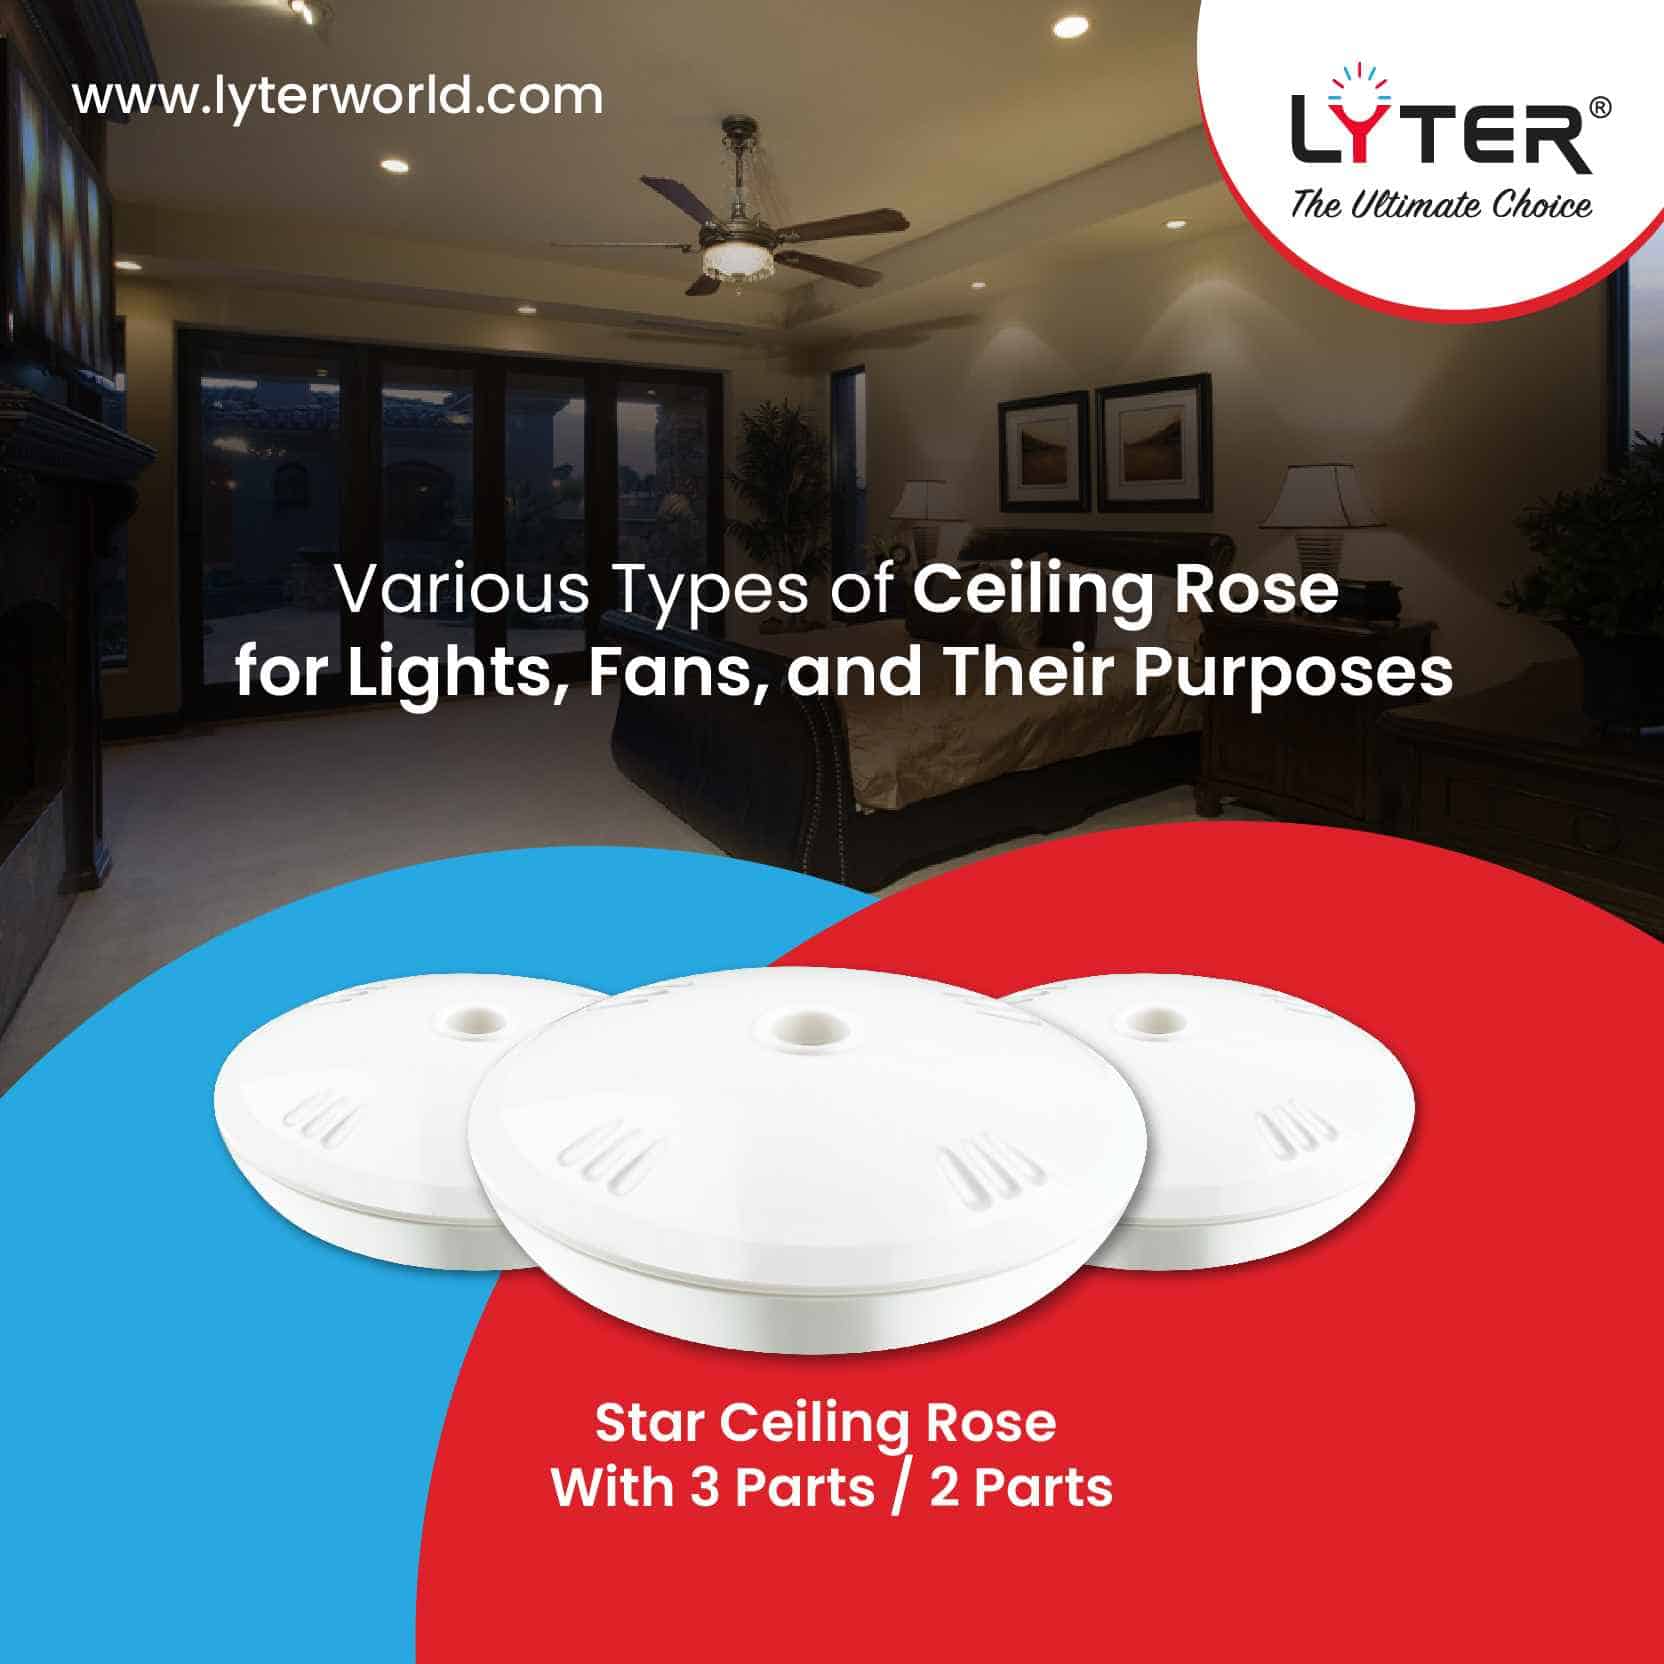 Types of Ceiling Rose